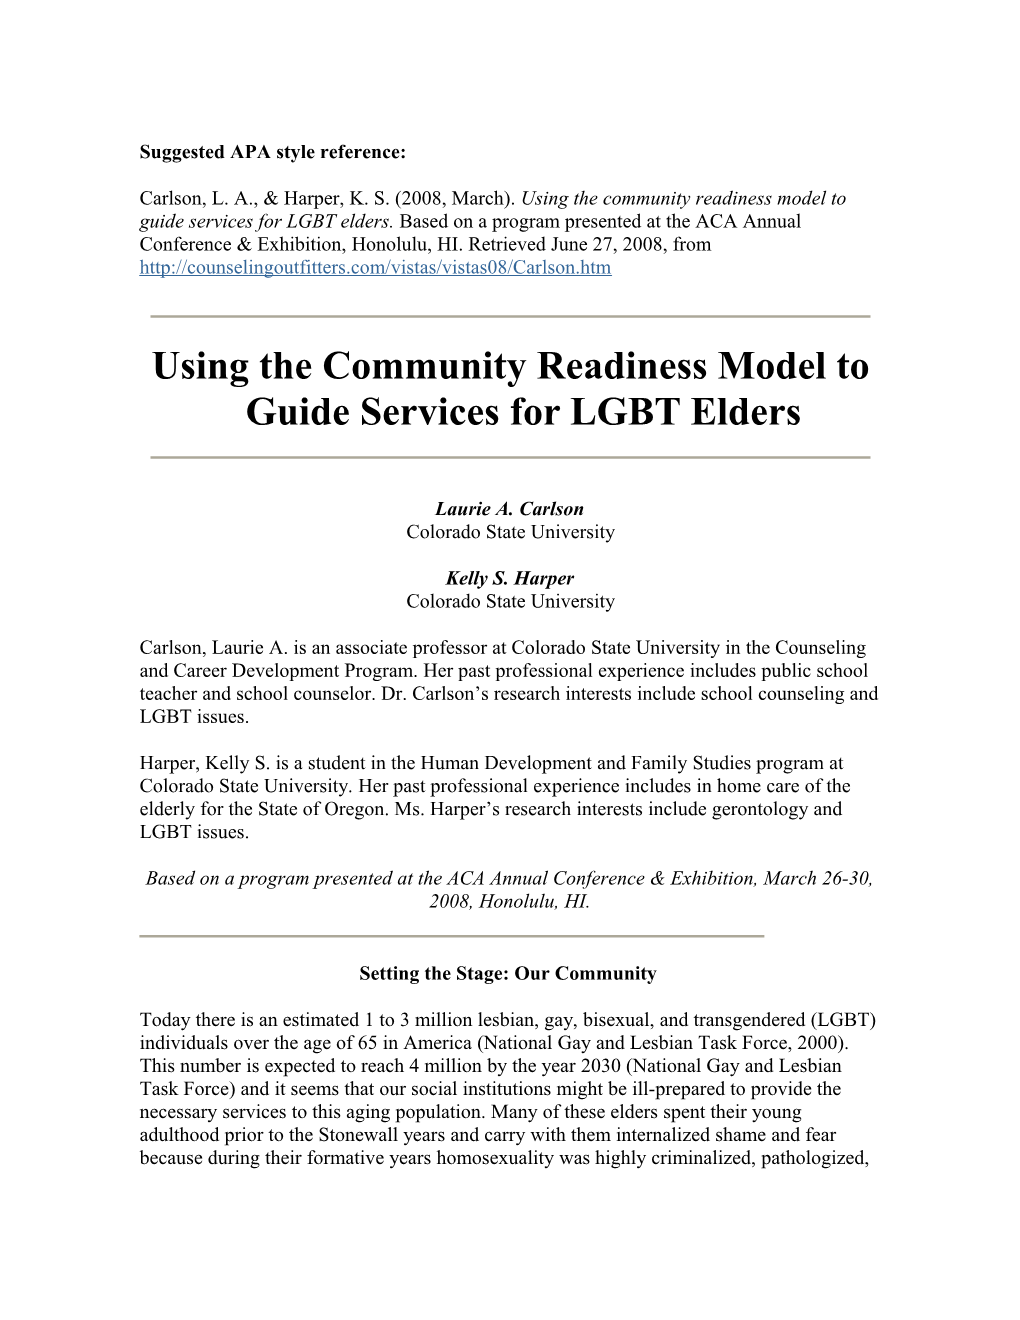 Using the Community Readiness Model to Guide Services for LGBT Elders